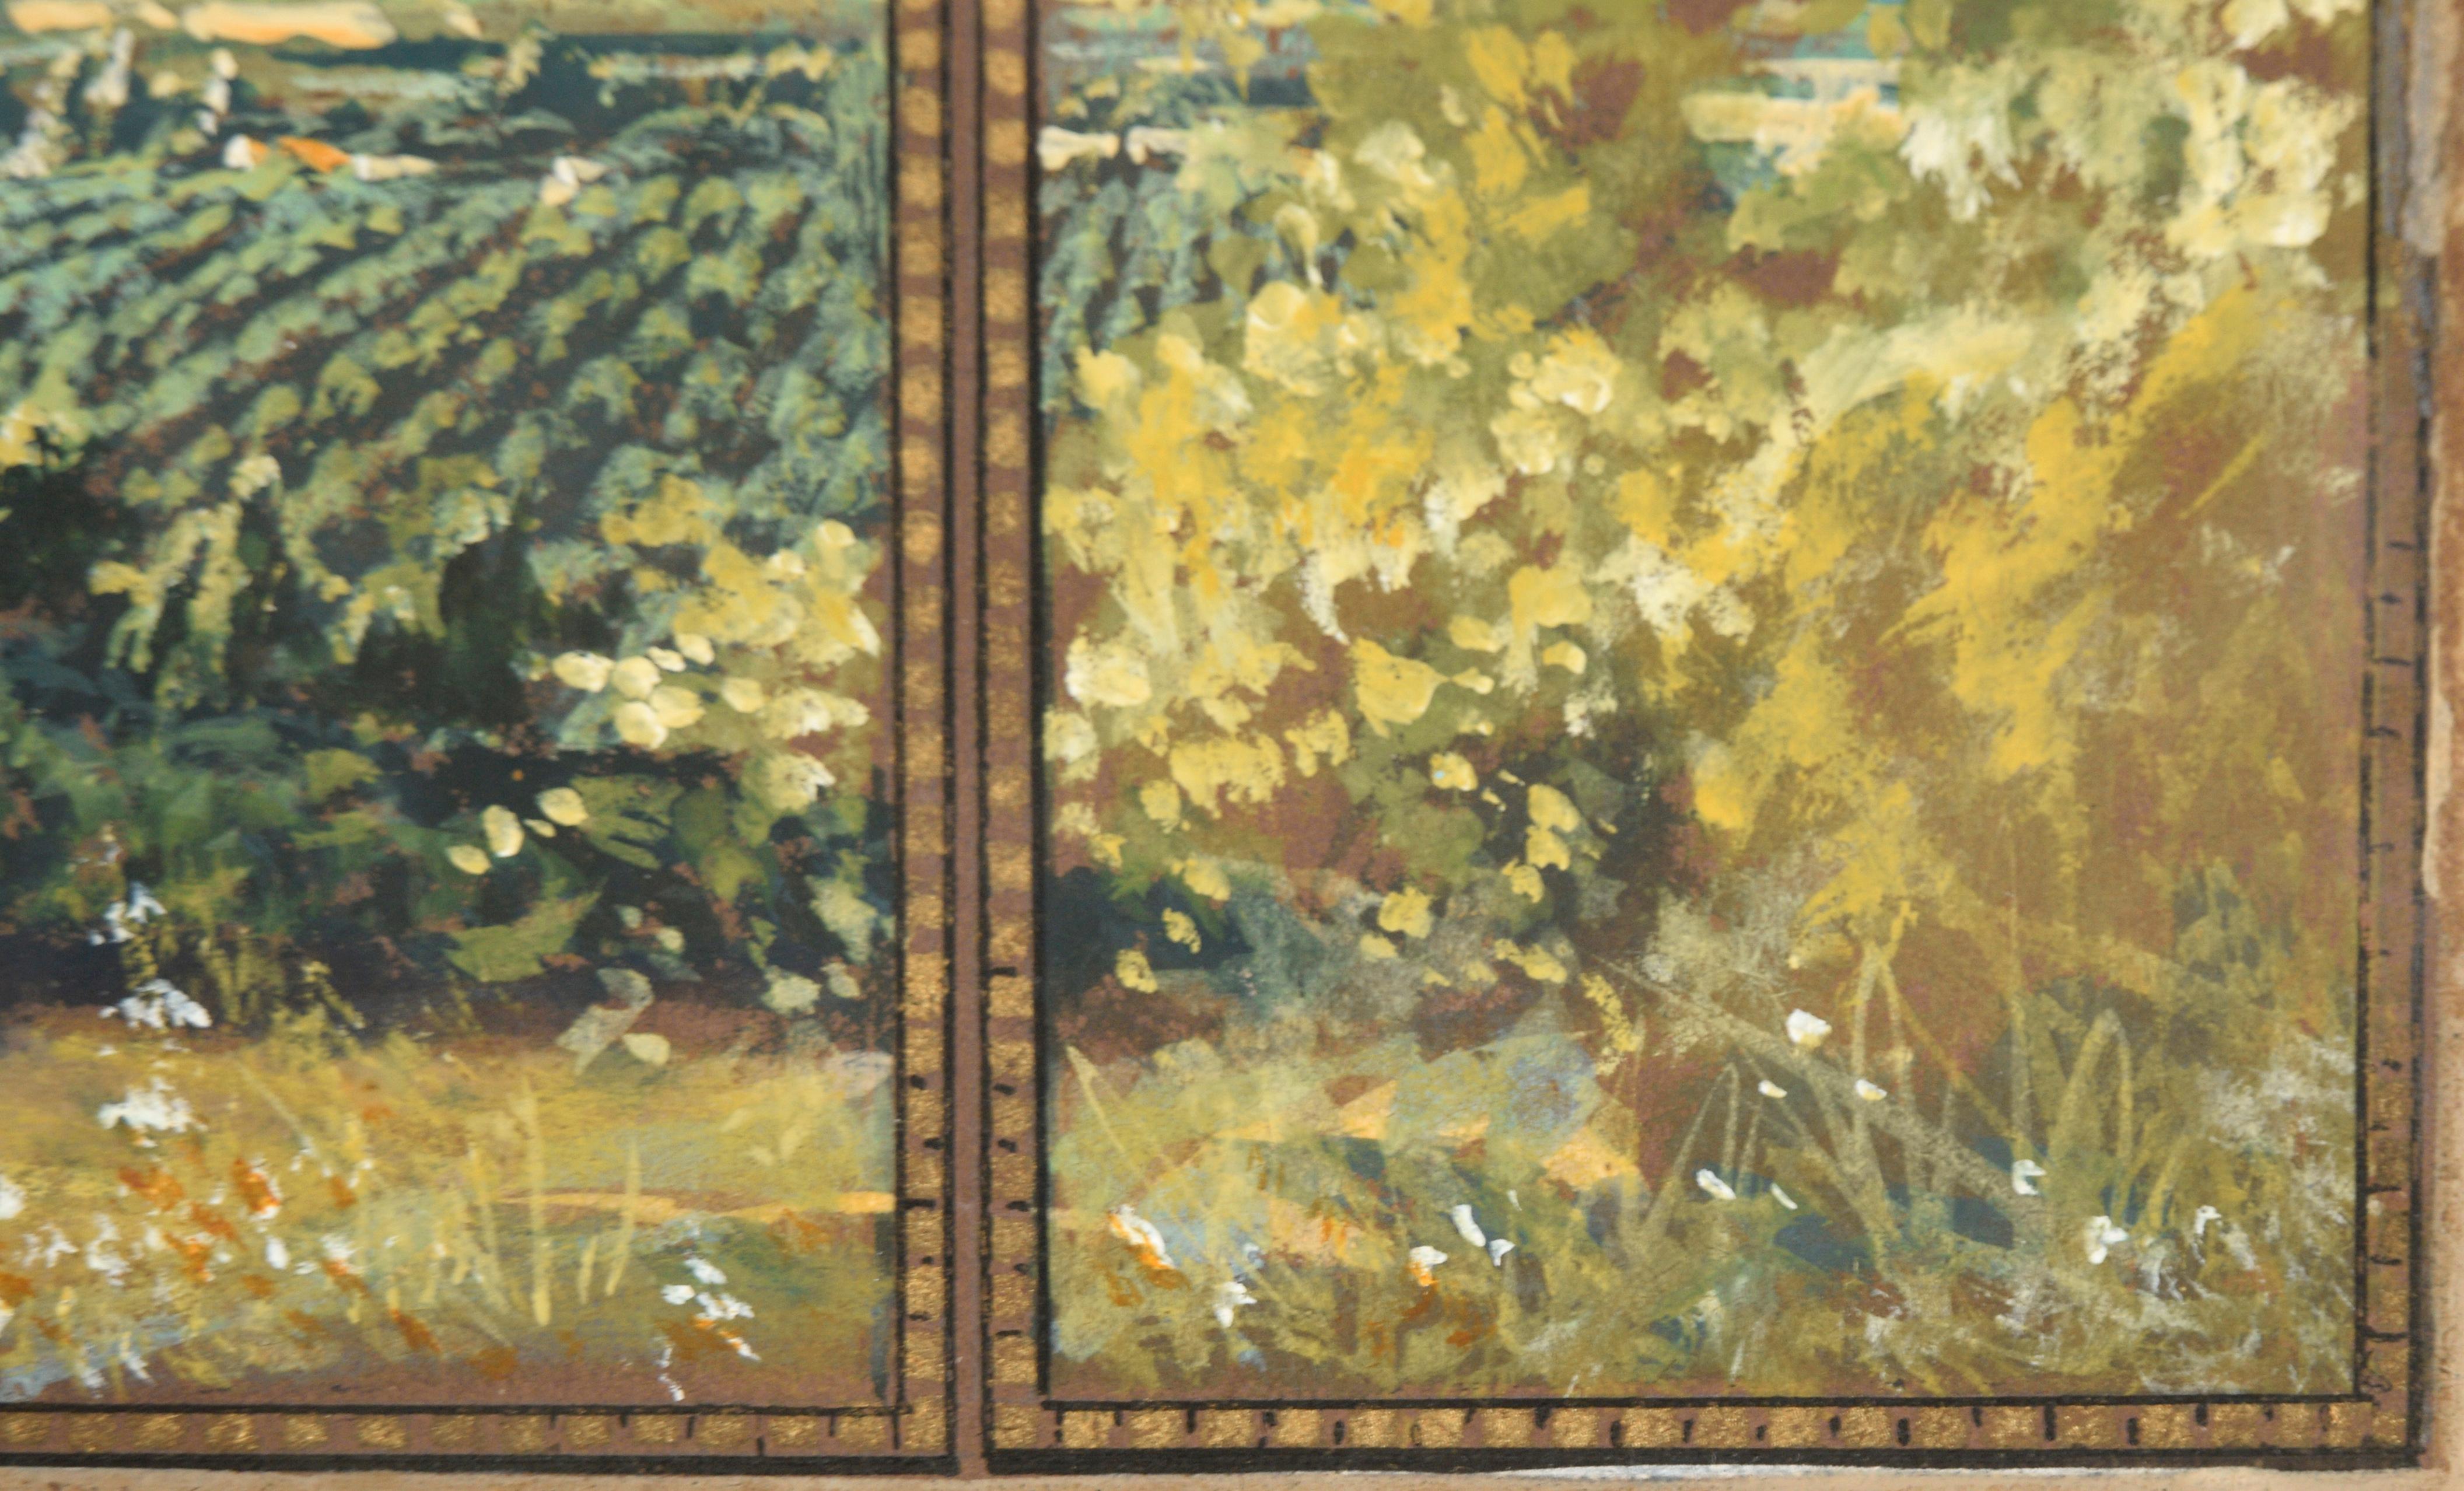 Vibrant depiction of a view from a window by an unknown artist (American, 20th Century). This sweeping landscape, composed in a horizontal panoramic view, depicts a distant vineyard framed by tall mountains in the distance and beautiful autumn trees